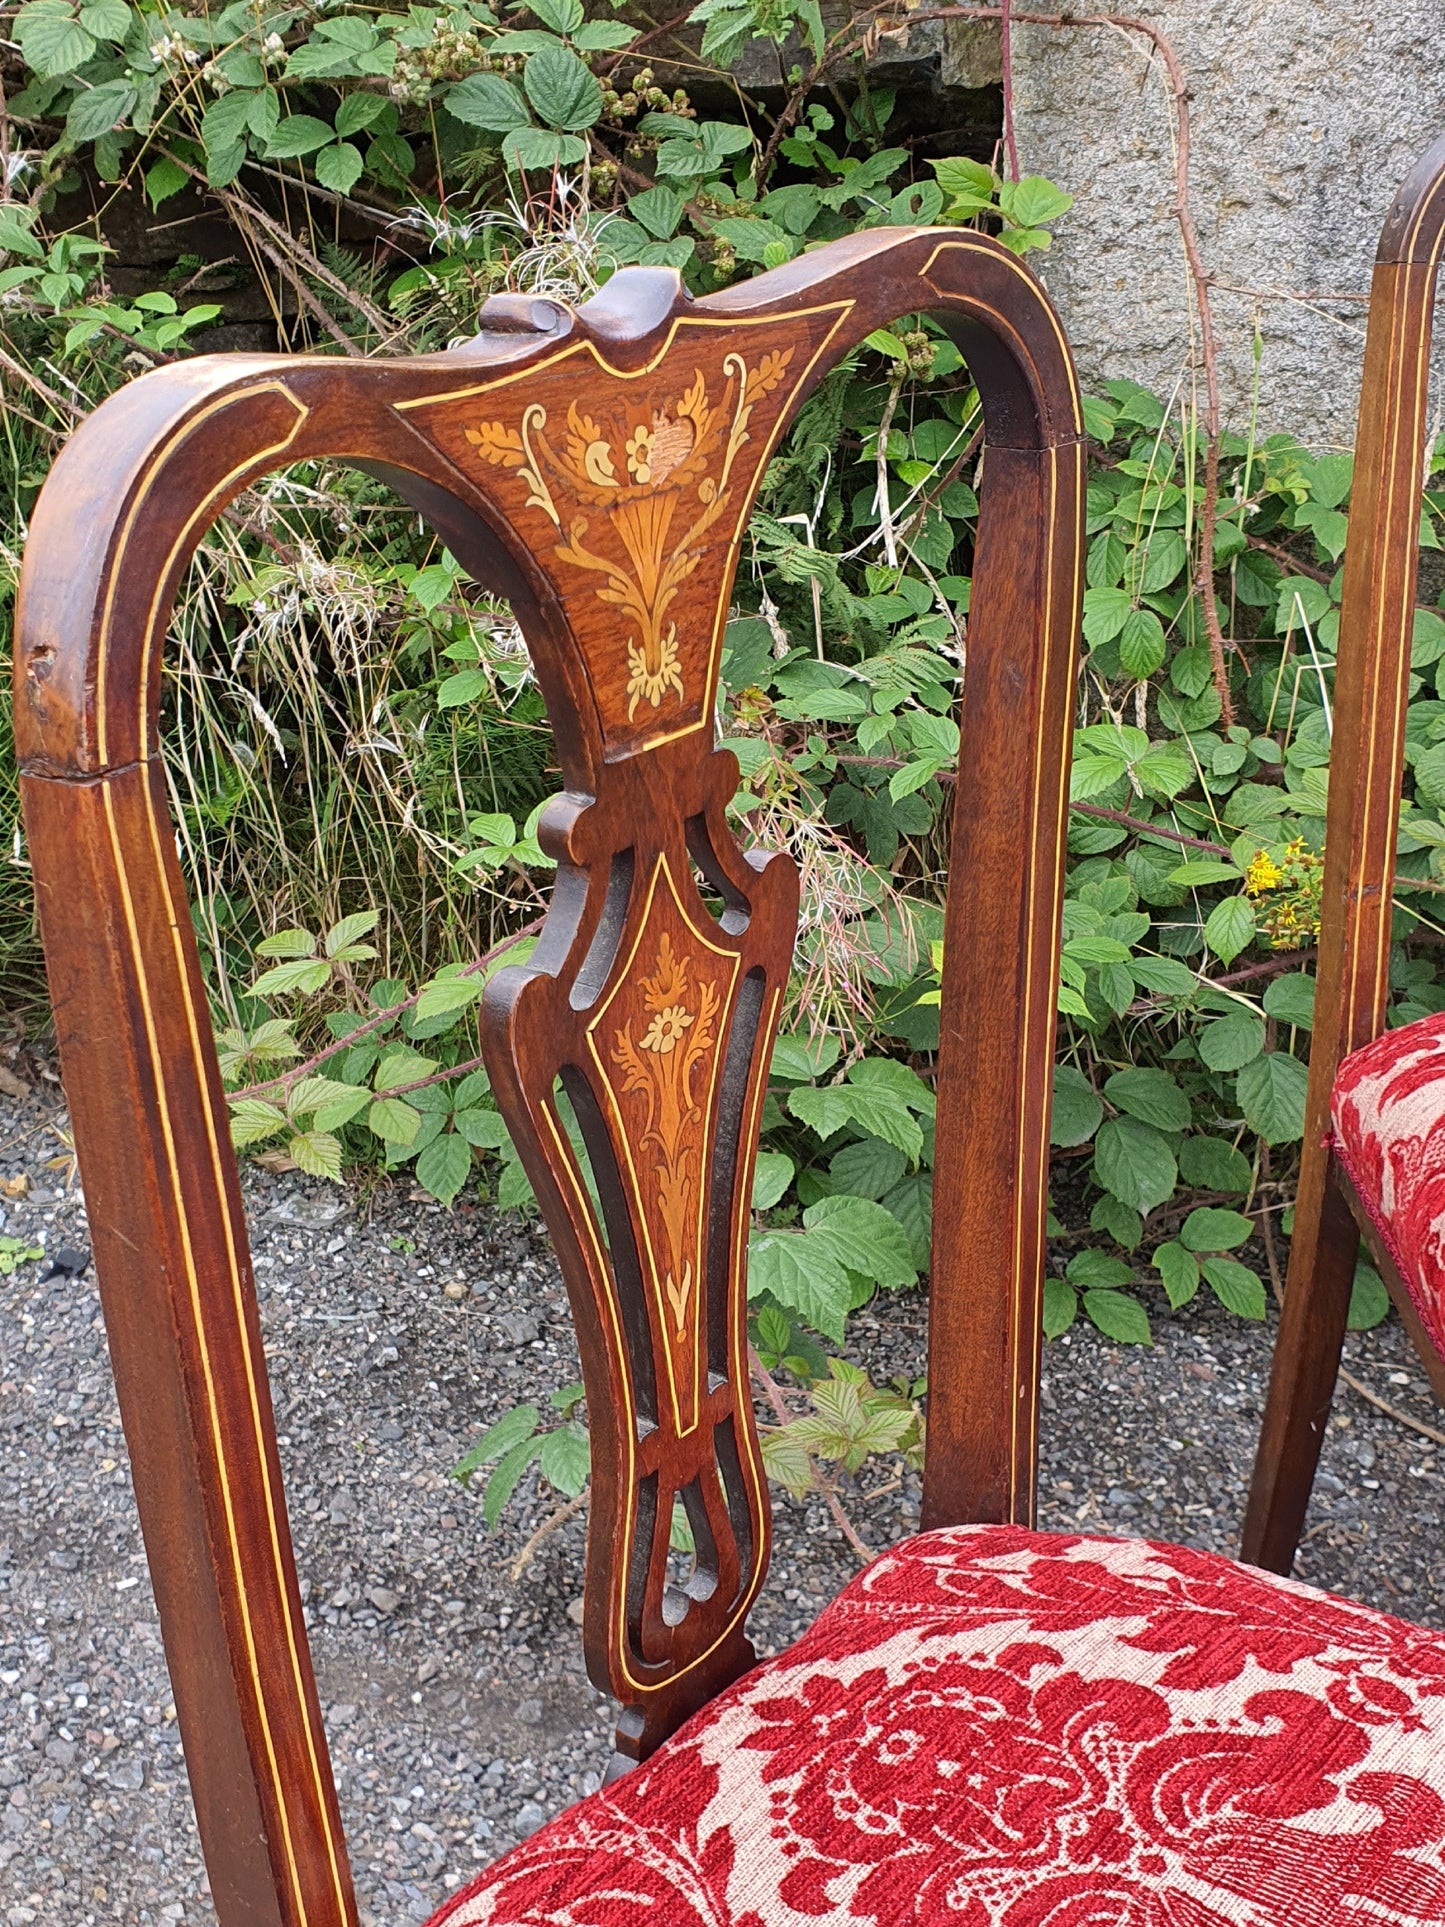 A pair of Wonderful Victorian Chair with Inlaid, newly upholstered with fabulous Damask Fabric